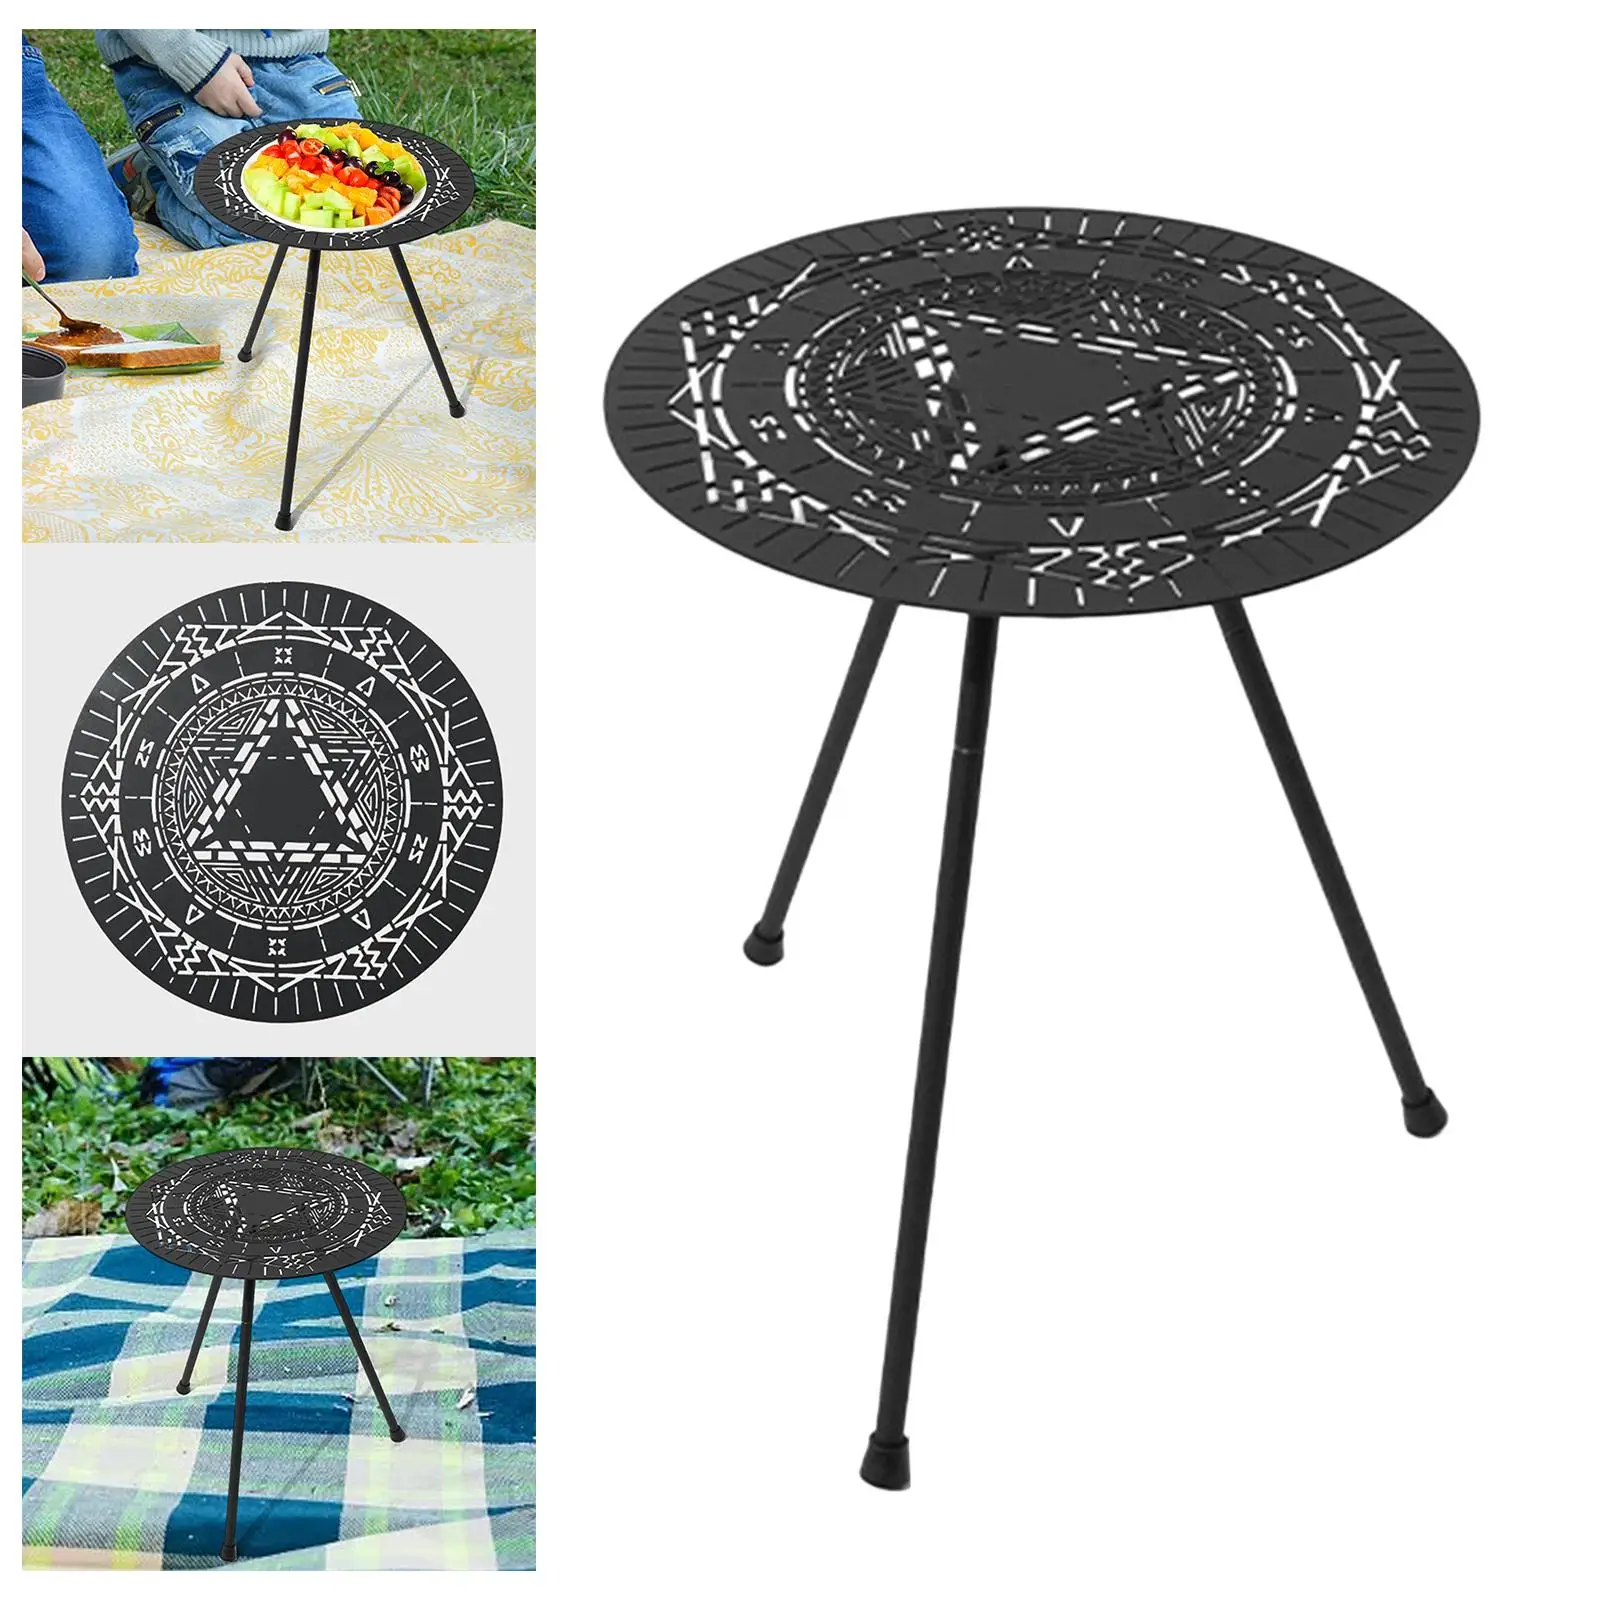 Black Portable Adjustable Round Camping Small Coffee Table Durable Picnic Table